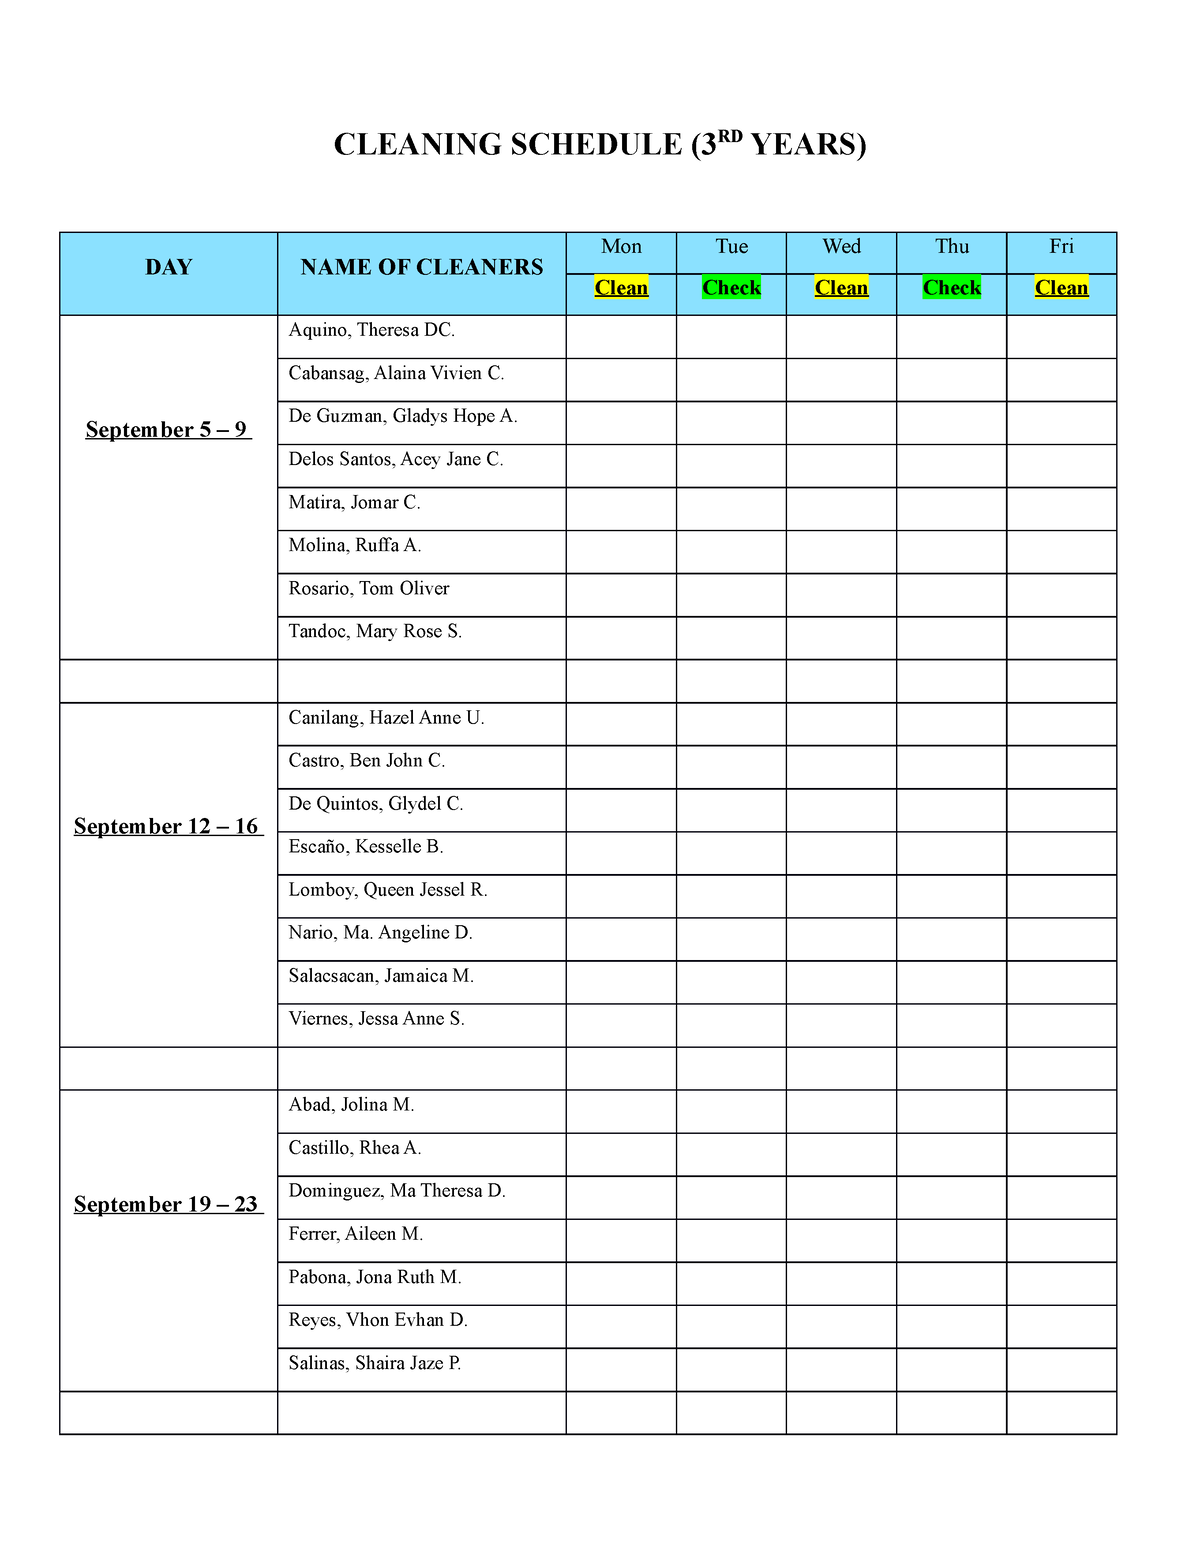 Cleaning schedule template - CLEANING SCHEDULE (3RD YEARS) DAY NAME OF ...